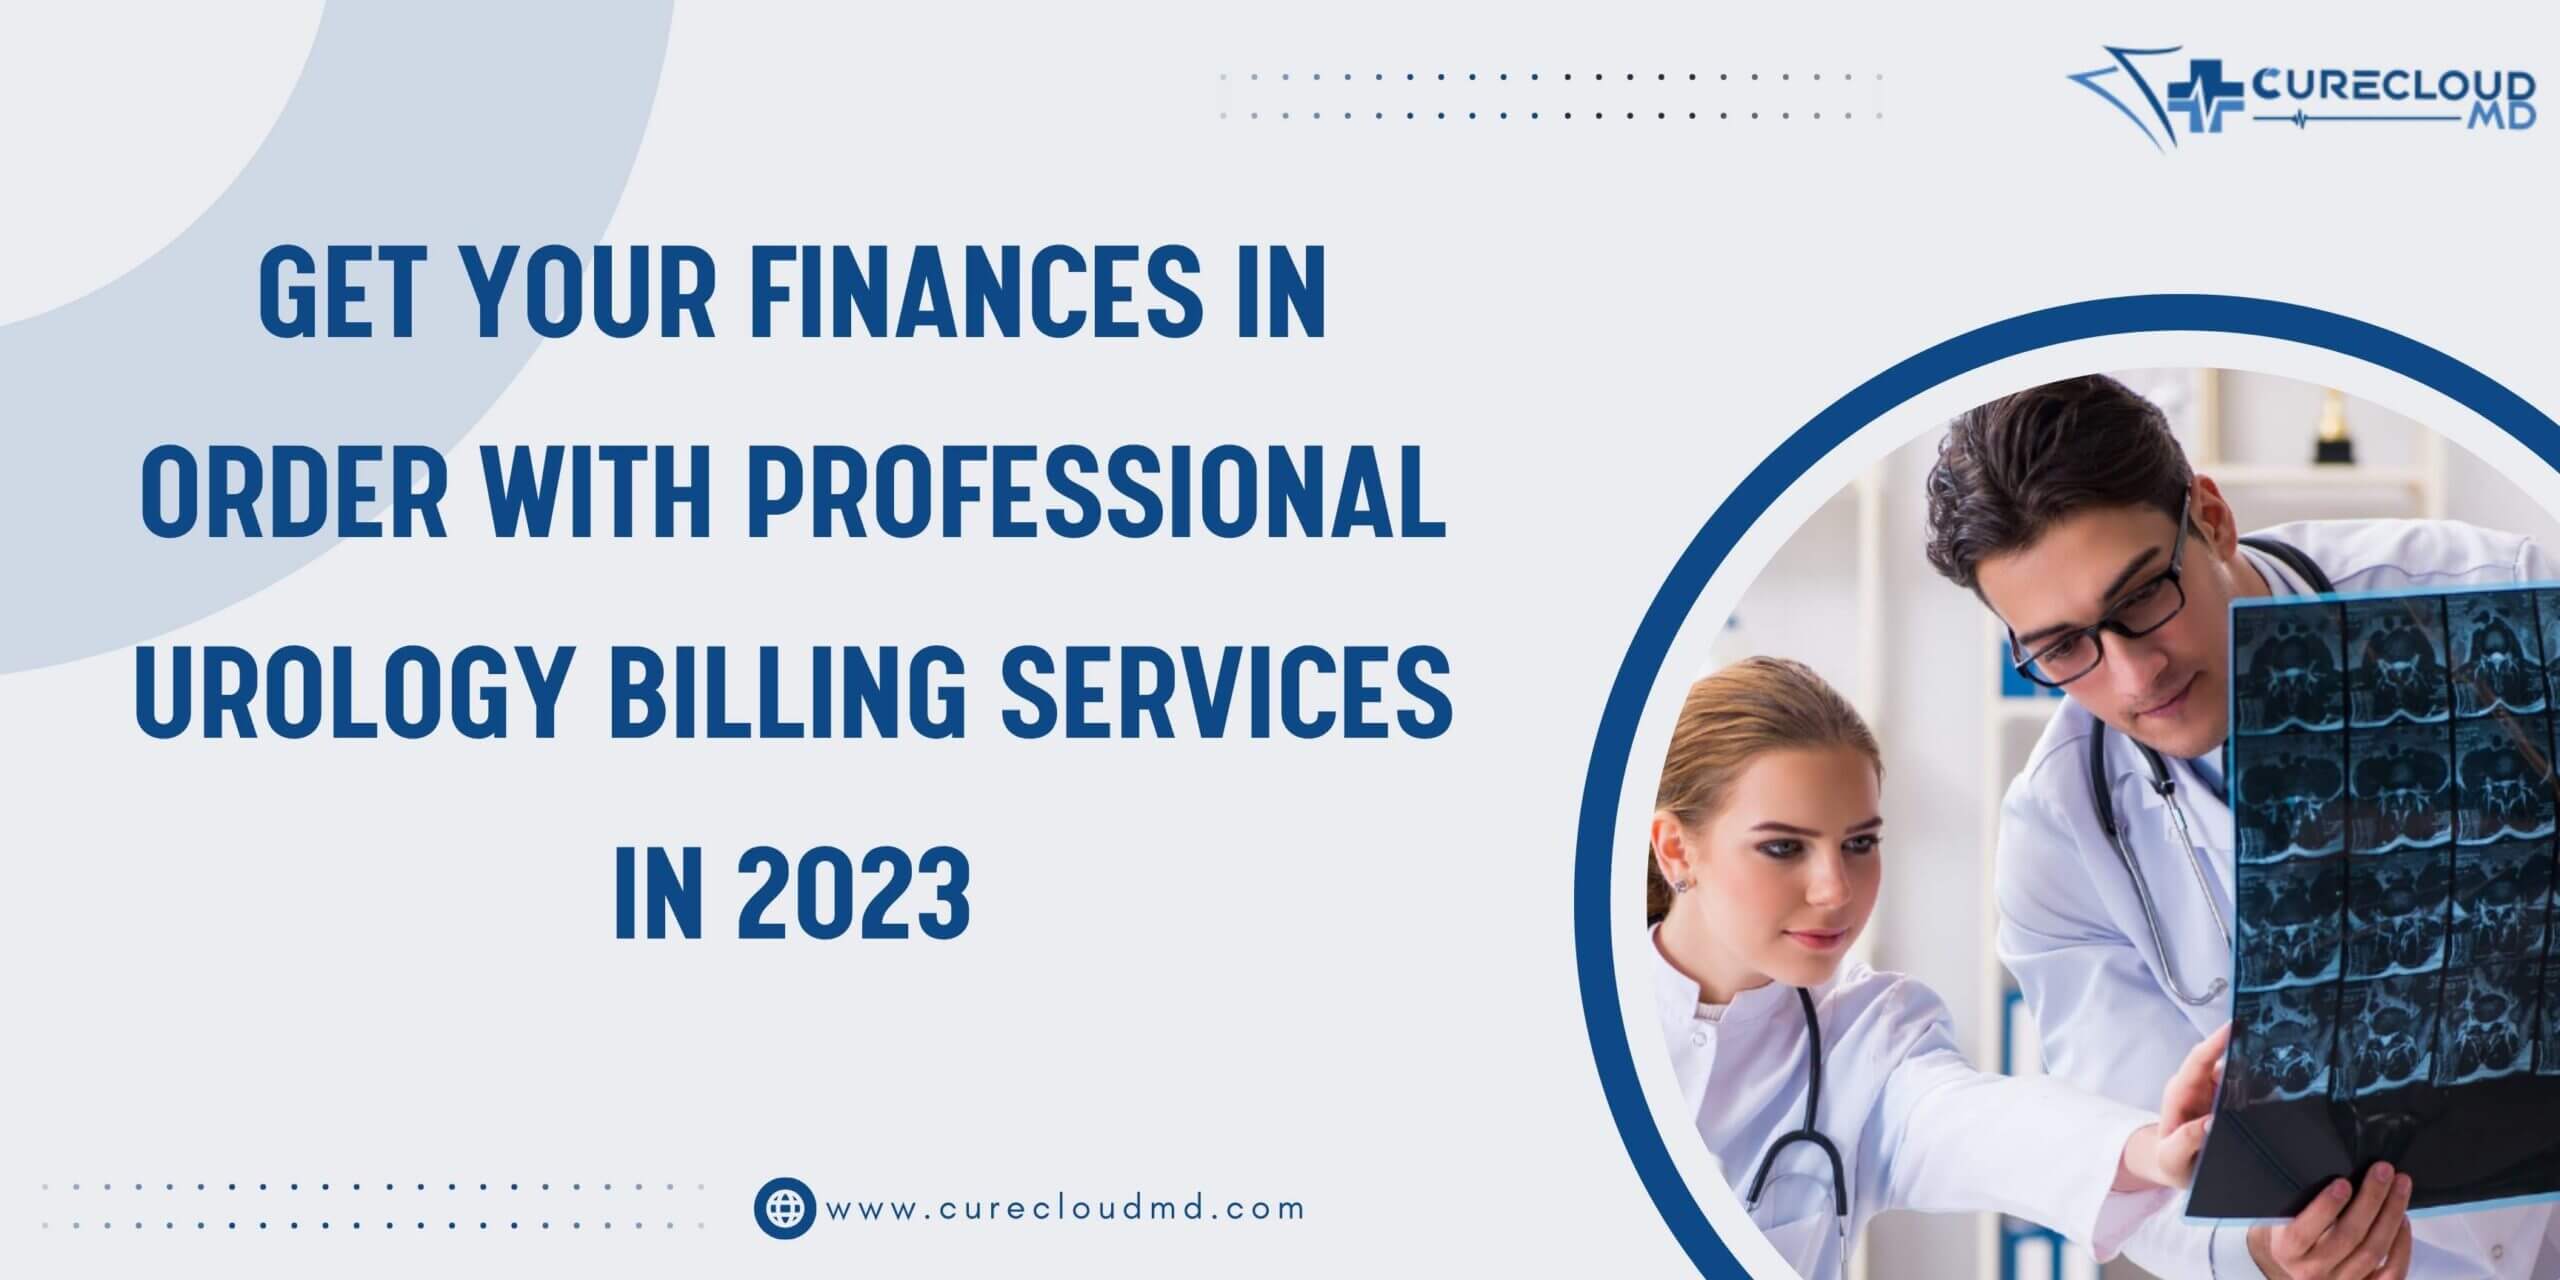 Get Your Finances In Order With Professional Urology Billing Services in 2023